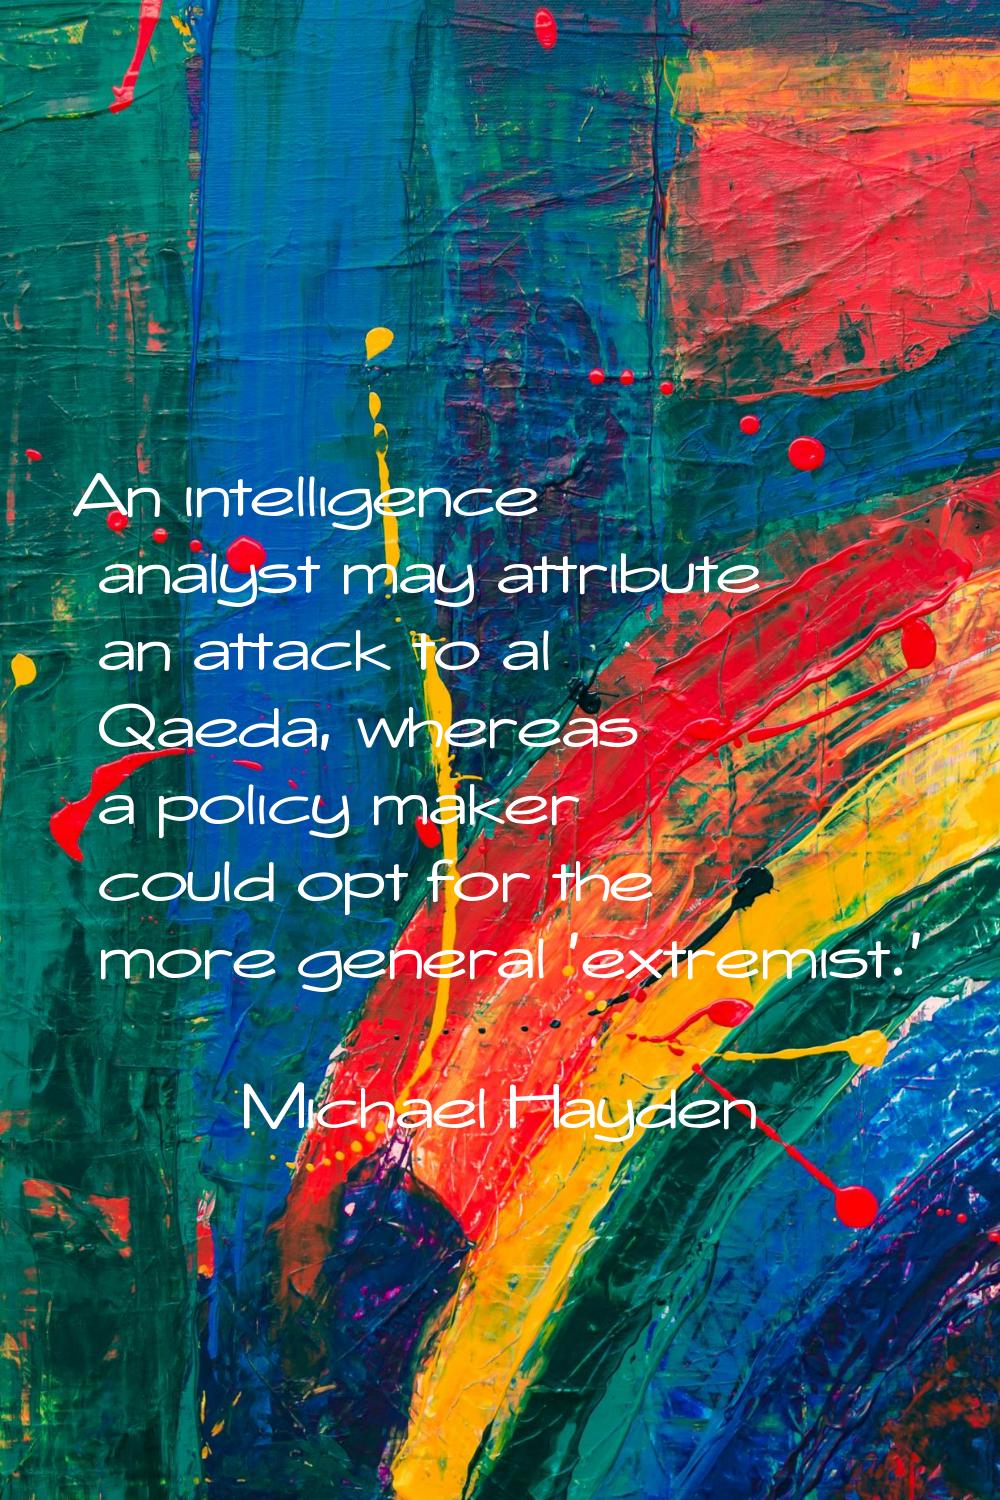 An intelligence analyst may attribute an attack to al Qaeda, whereas a policy maker could opt for t